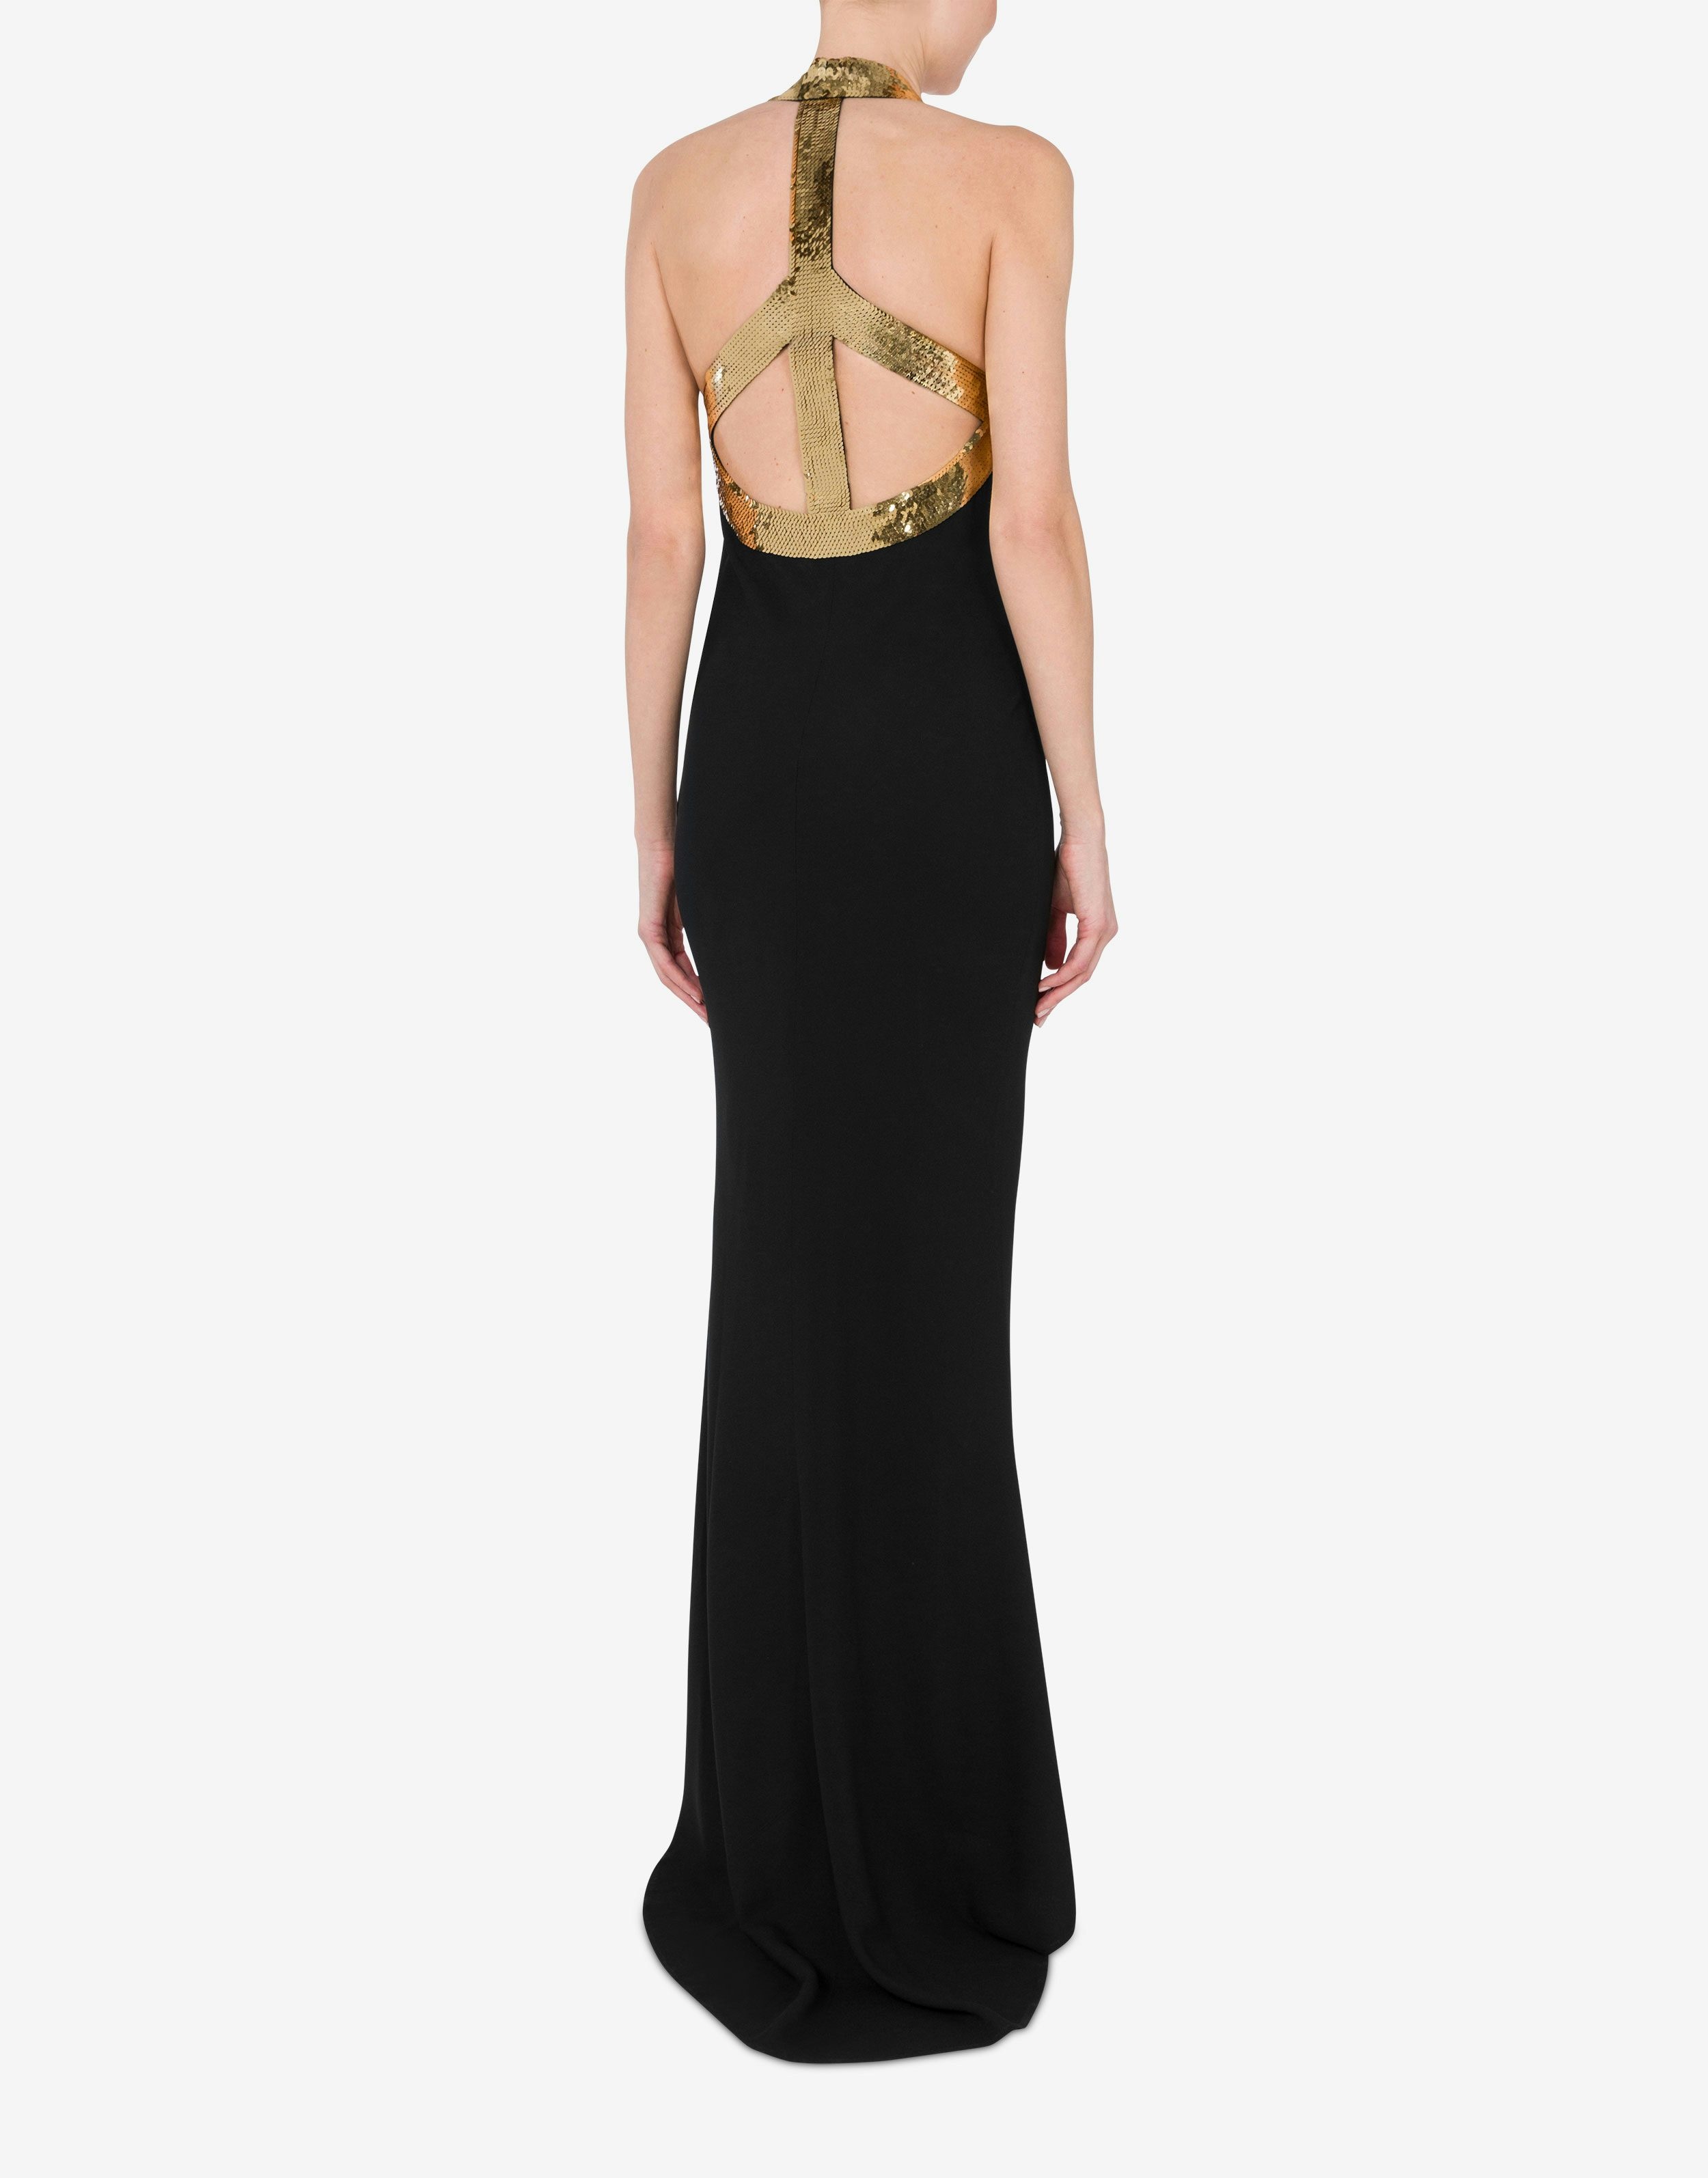 ENVERS SATIN DRESS WITH GOLD SEQUINS - 3